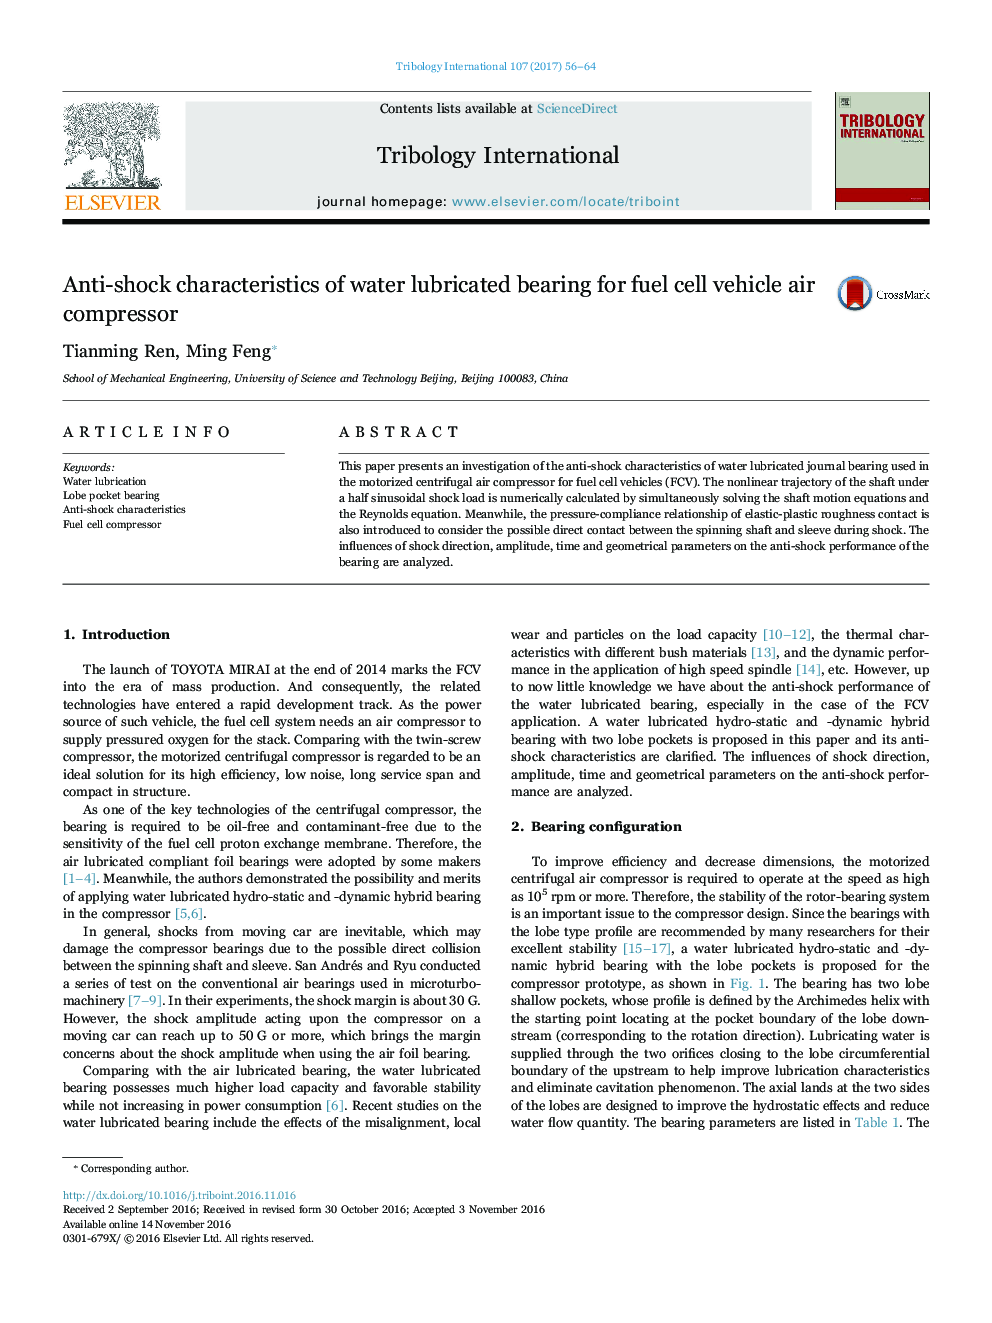 Anti-shock characteristics of water lubricated bearing for fuel cell vehicle air compressor